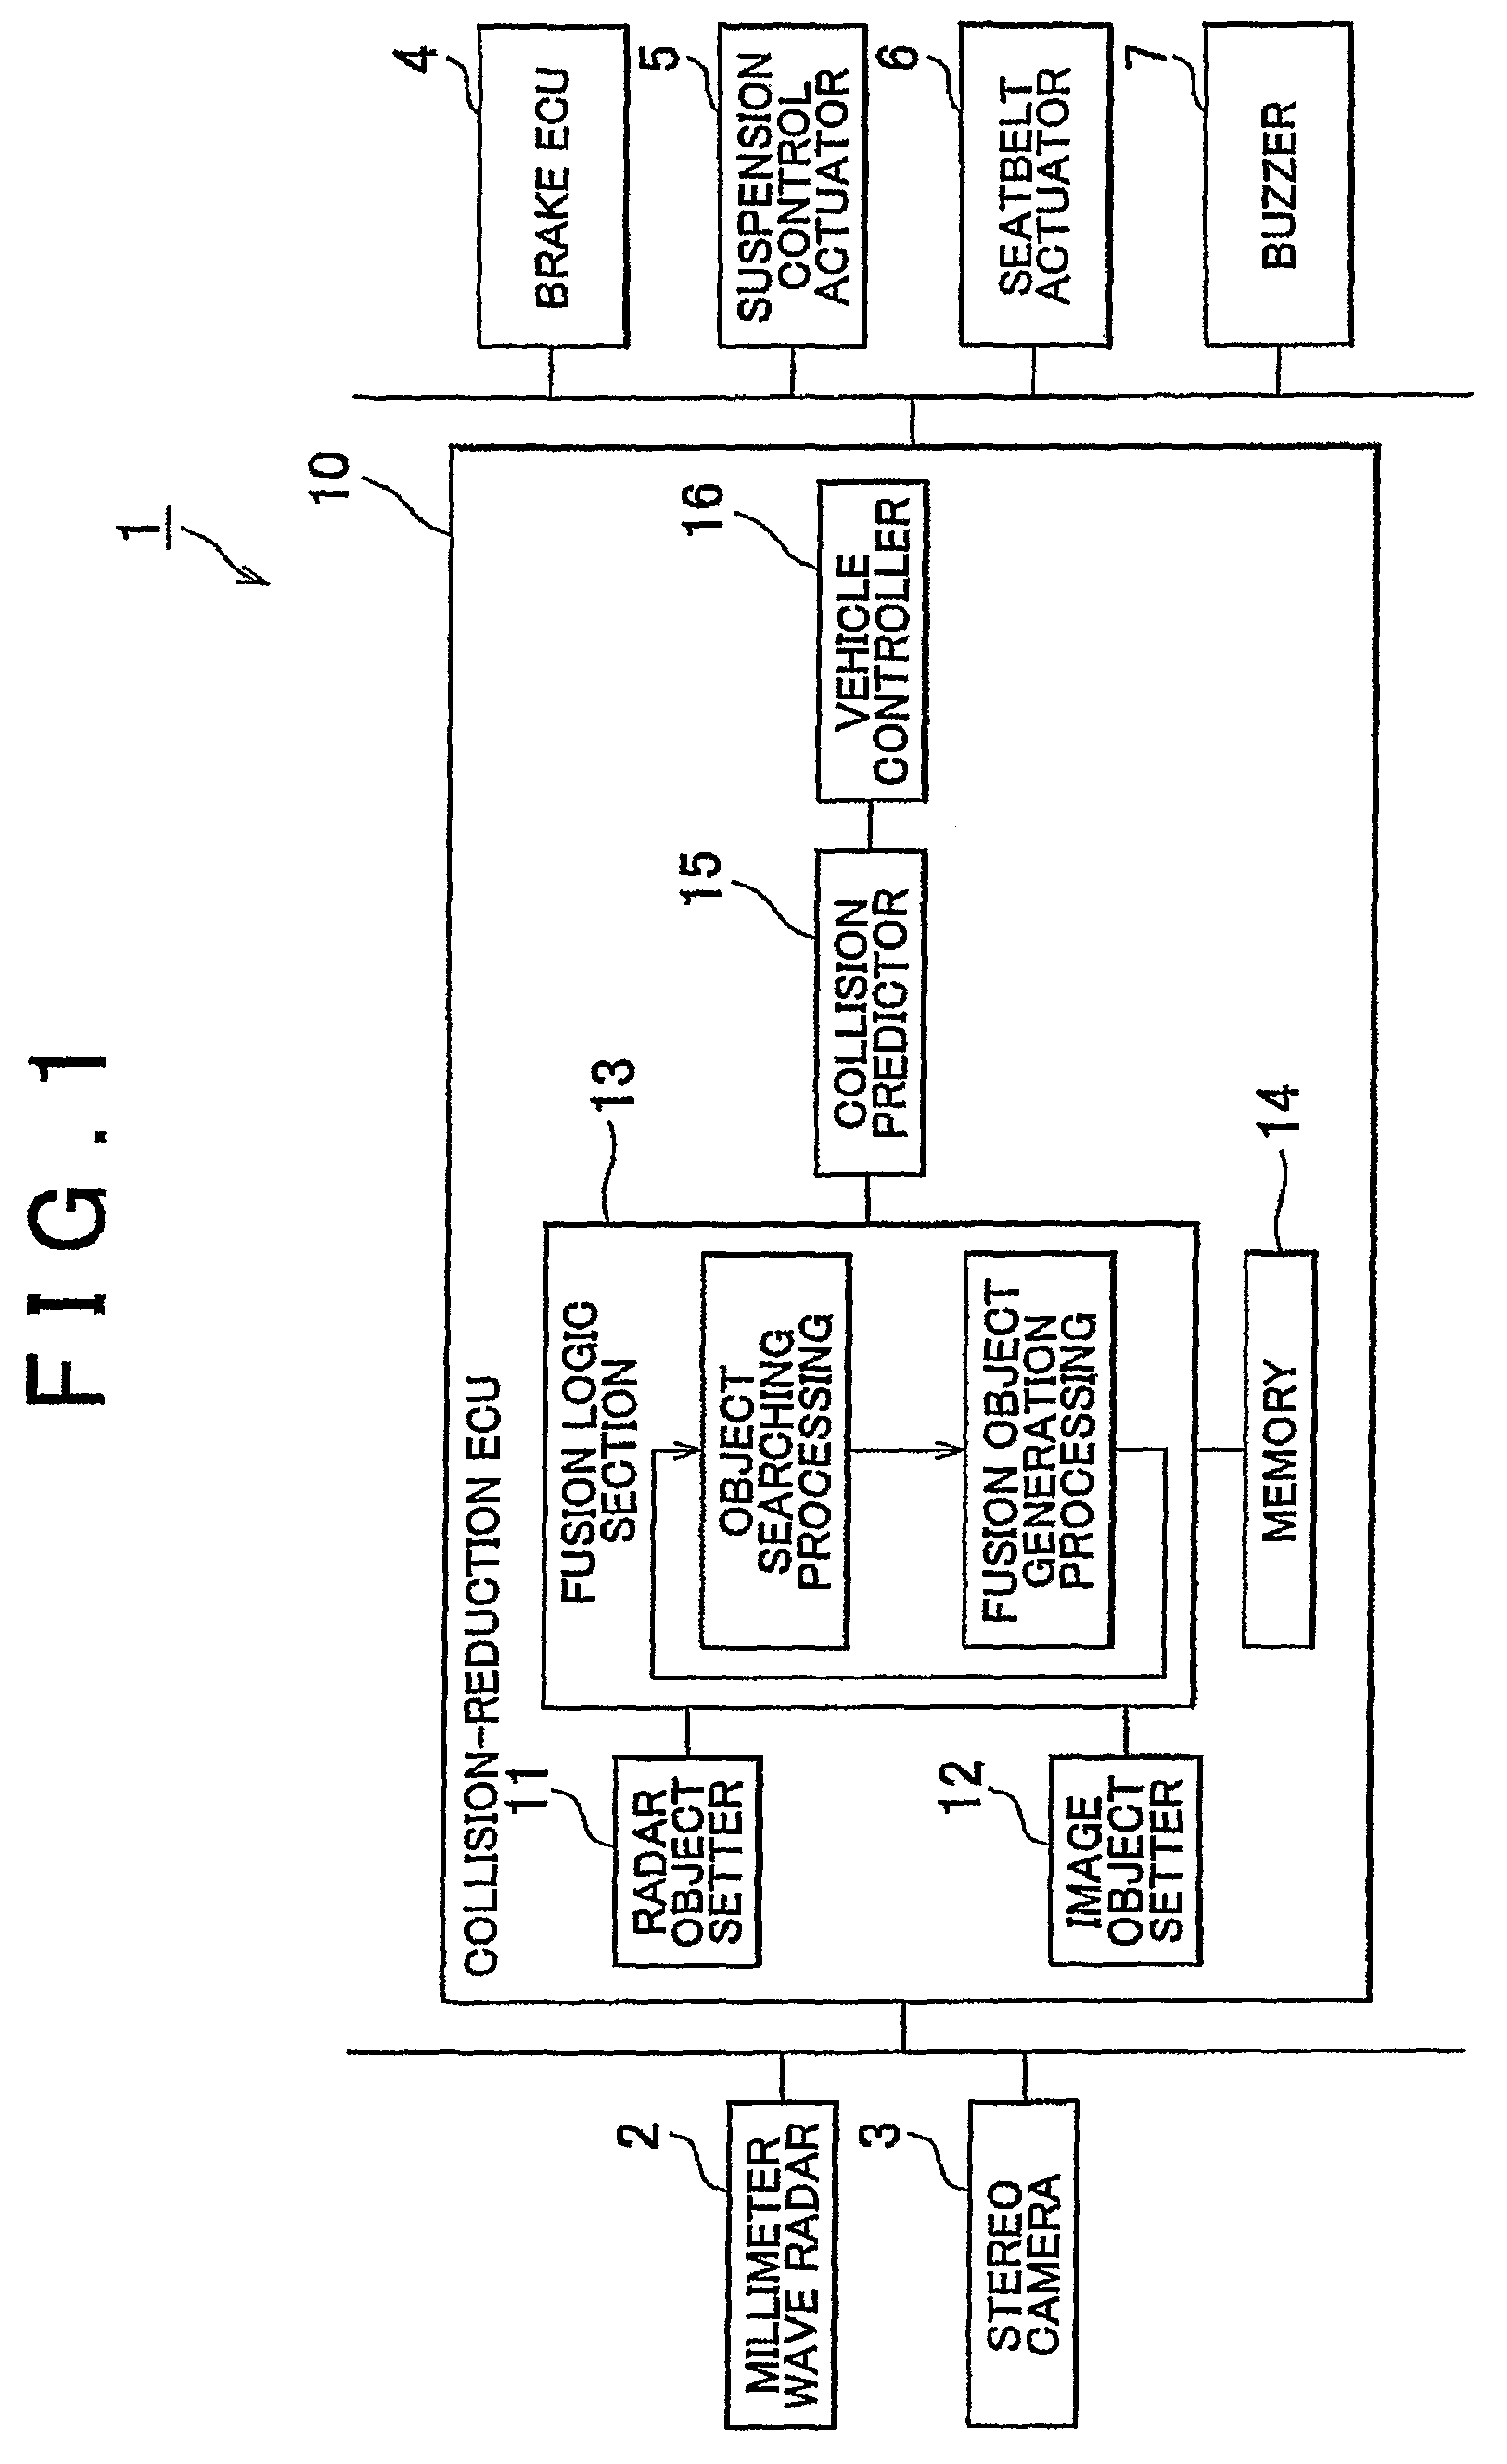 Object detecting apparatus and method for detecting an object